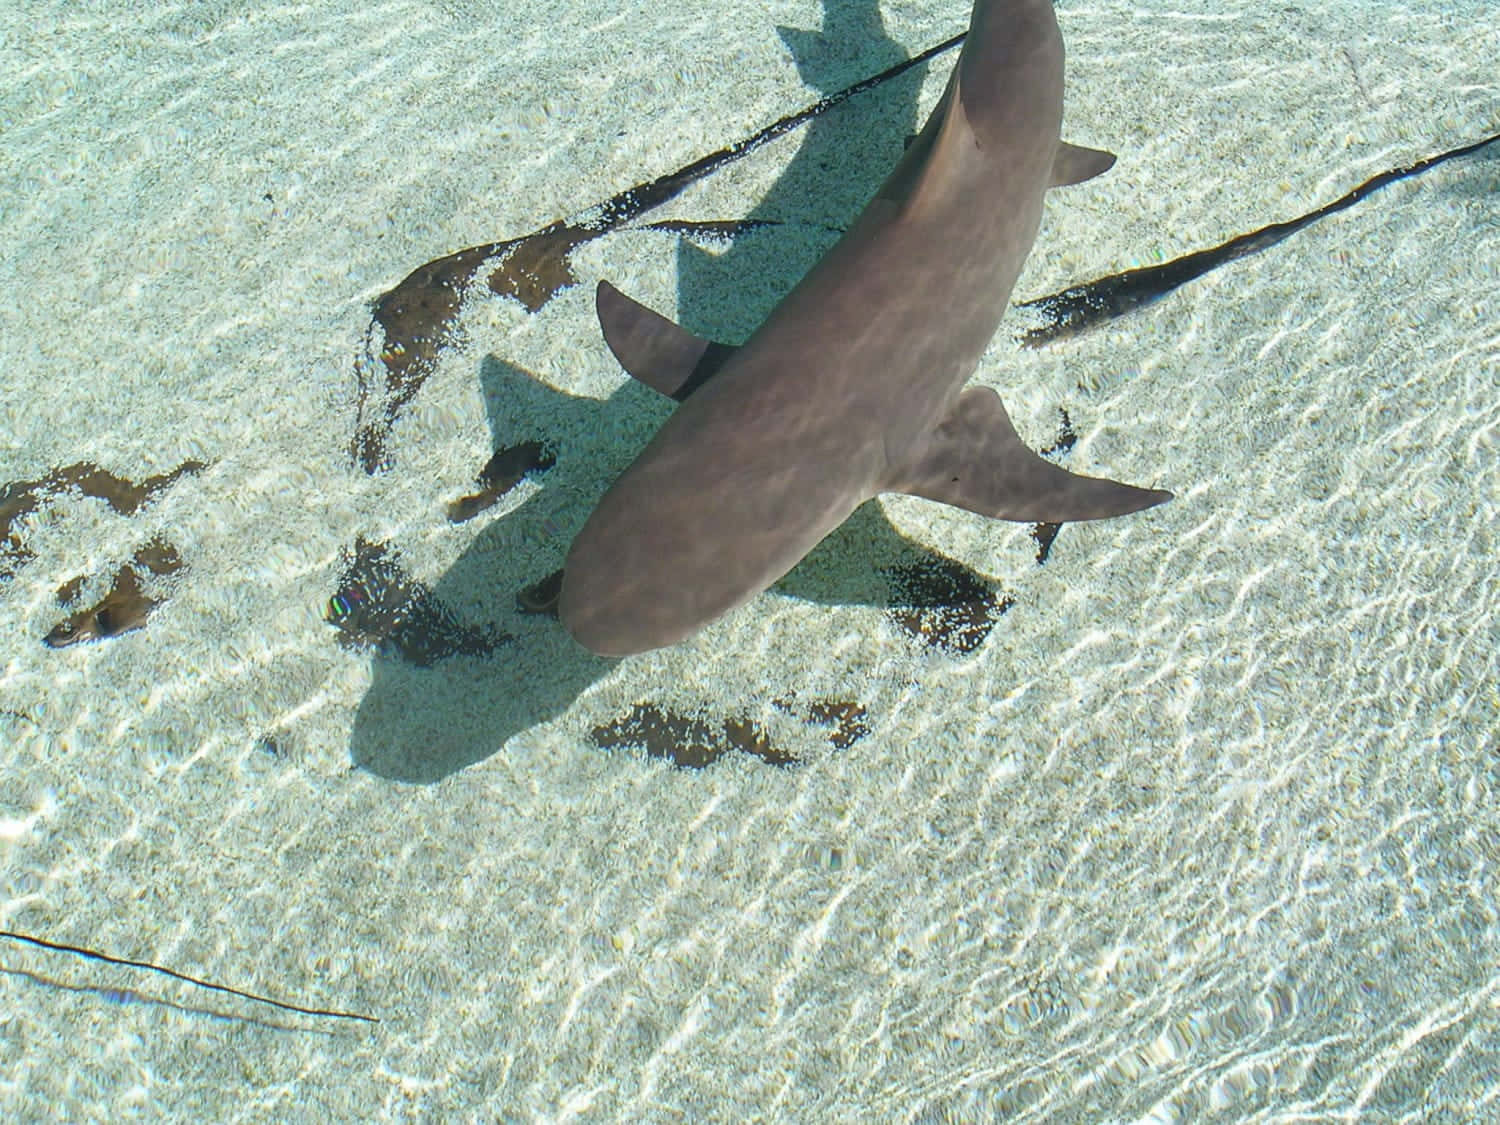 Copper Shark Crystal Clear Waters Wallpaper